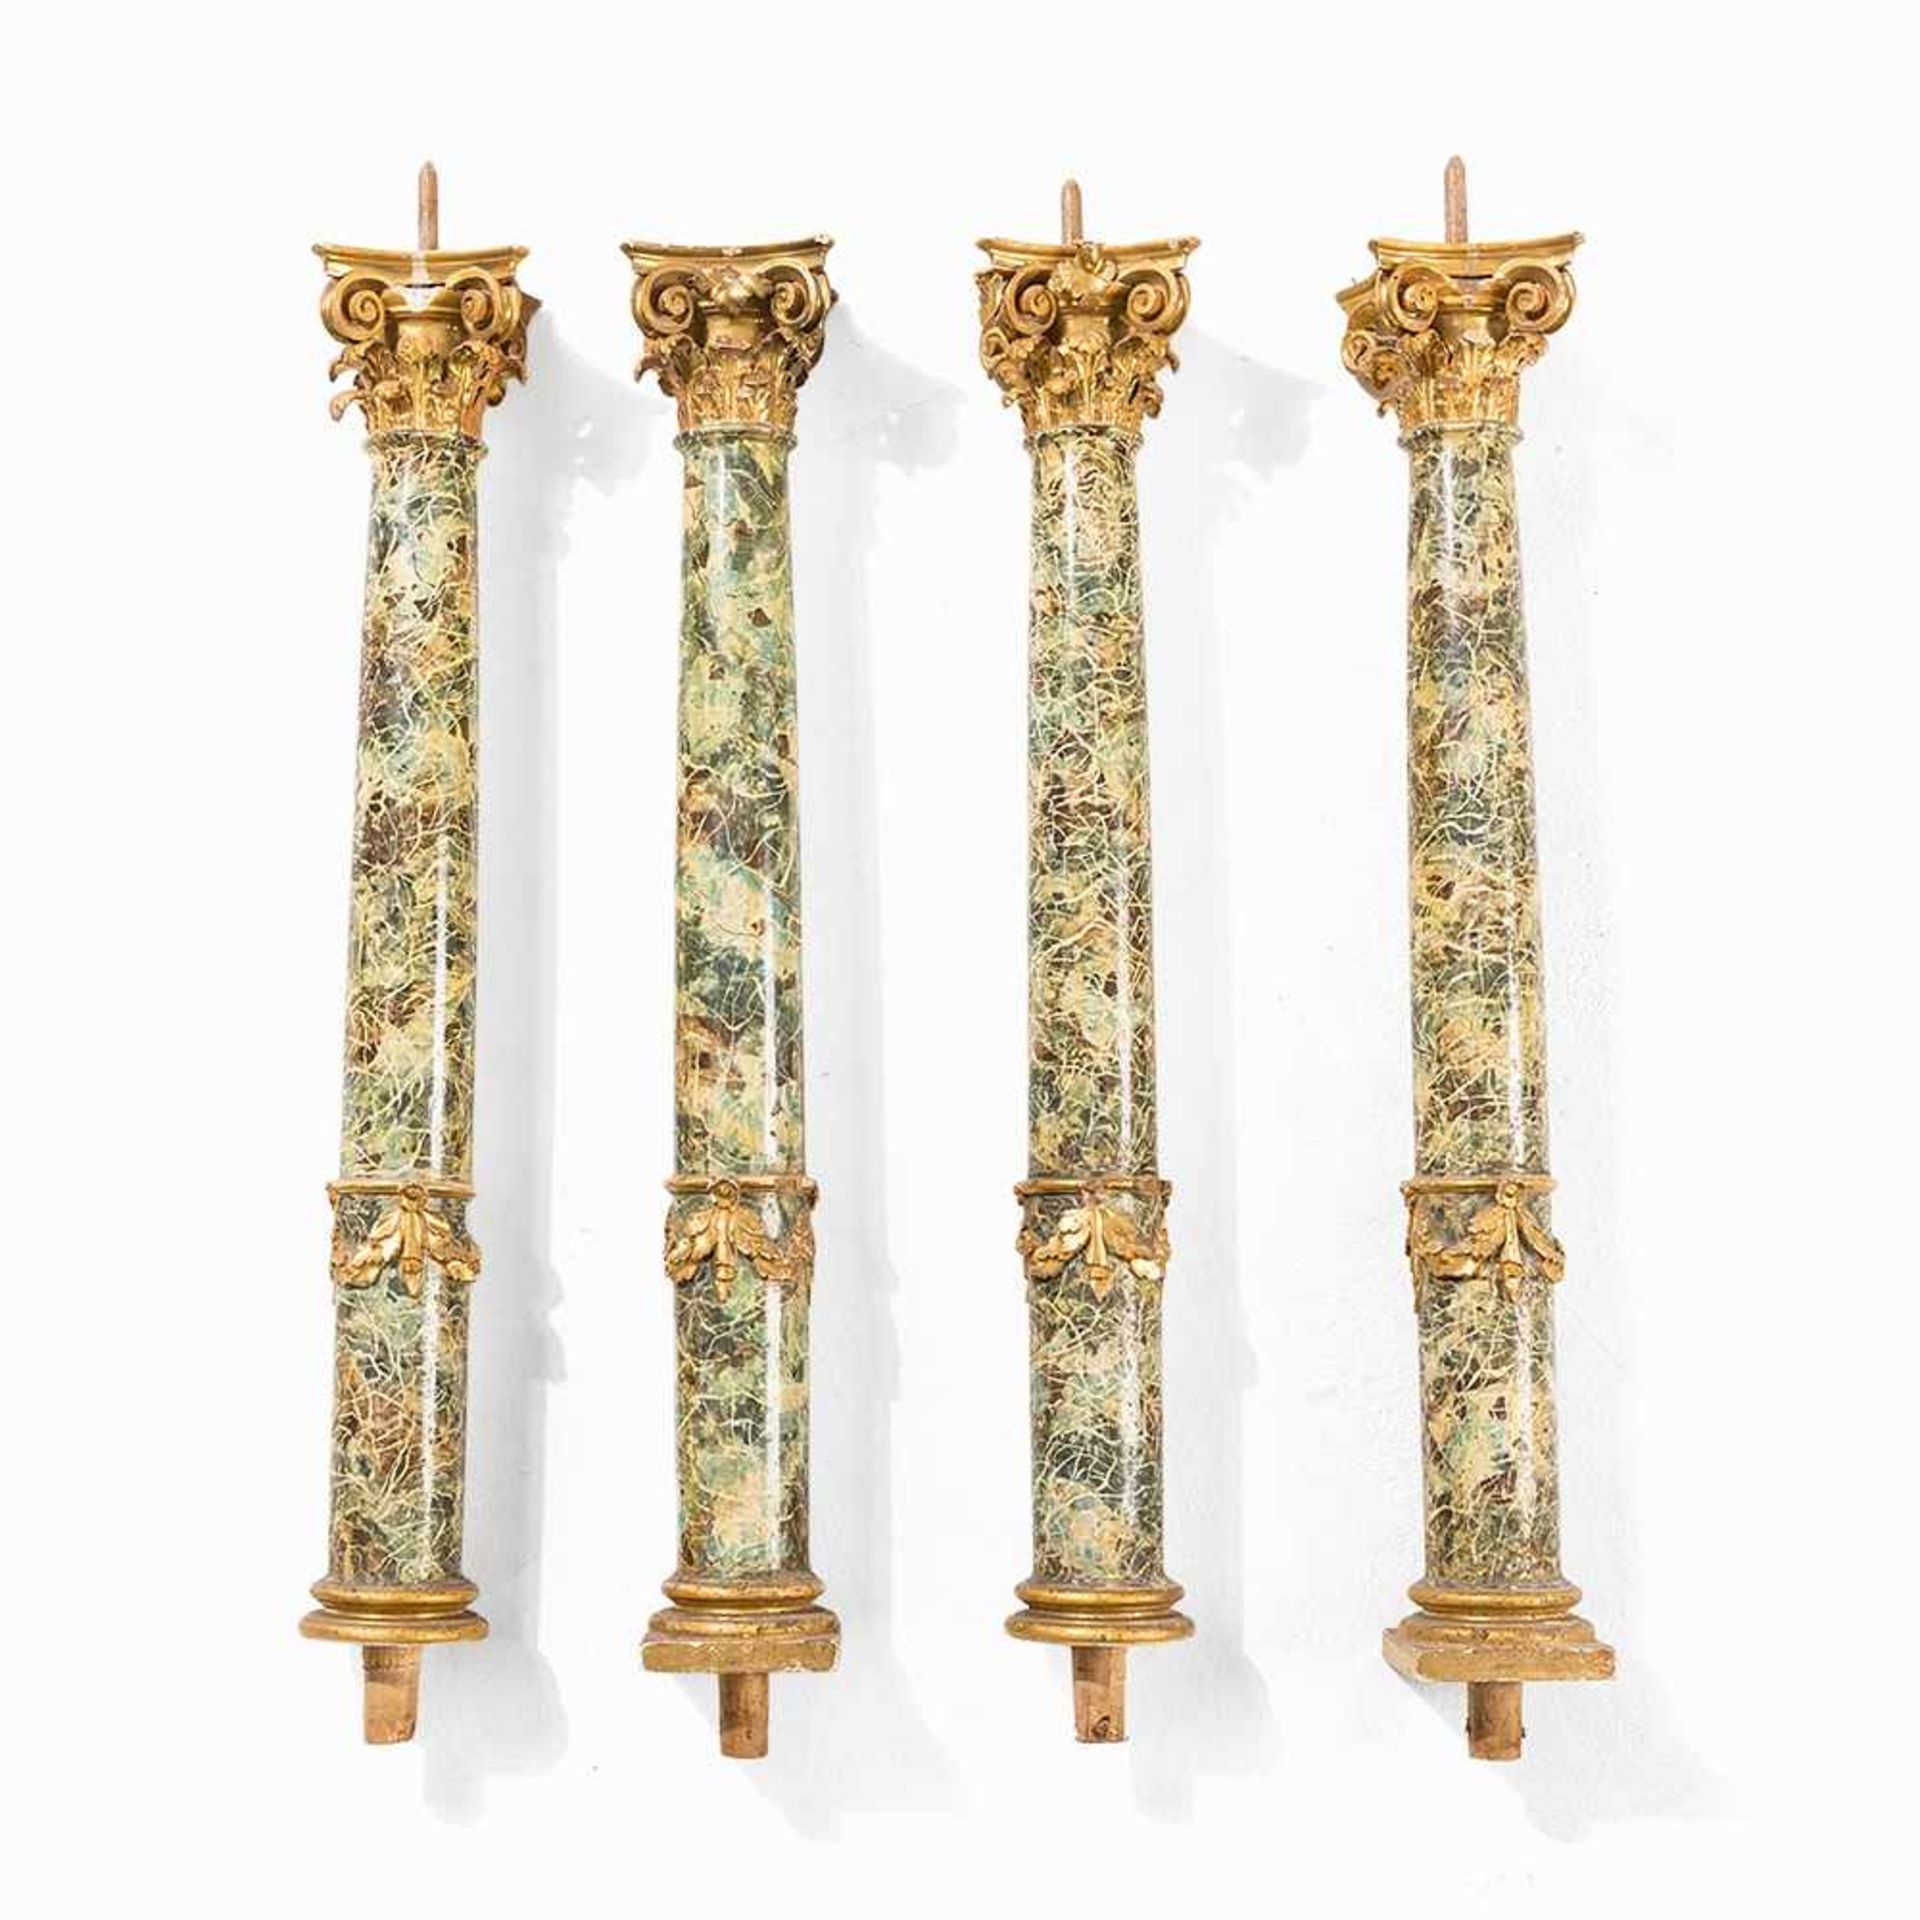 4 Corinthian Columns, Sicily, Late 18th C. Wood, carved and gold-plated, lacquered Sicily, late 18th - Bild 10 aus 10